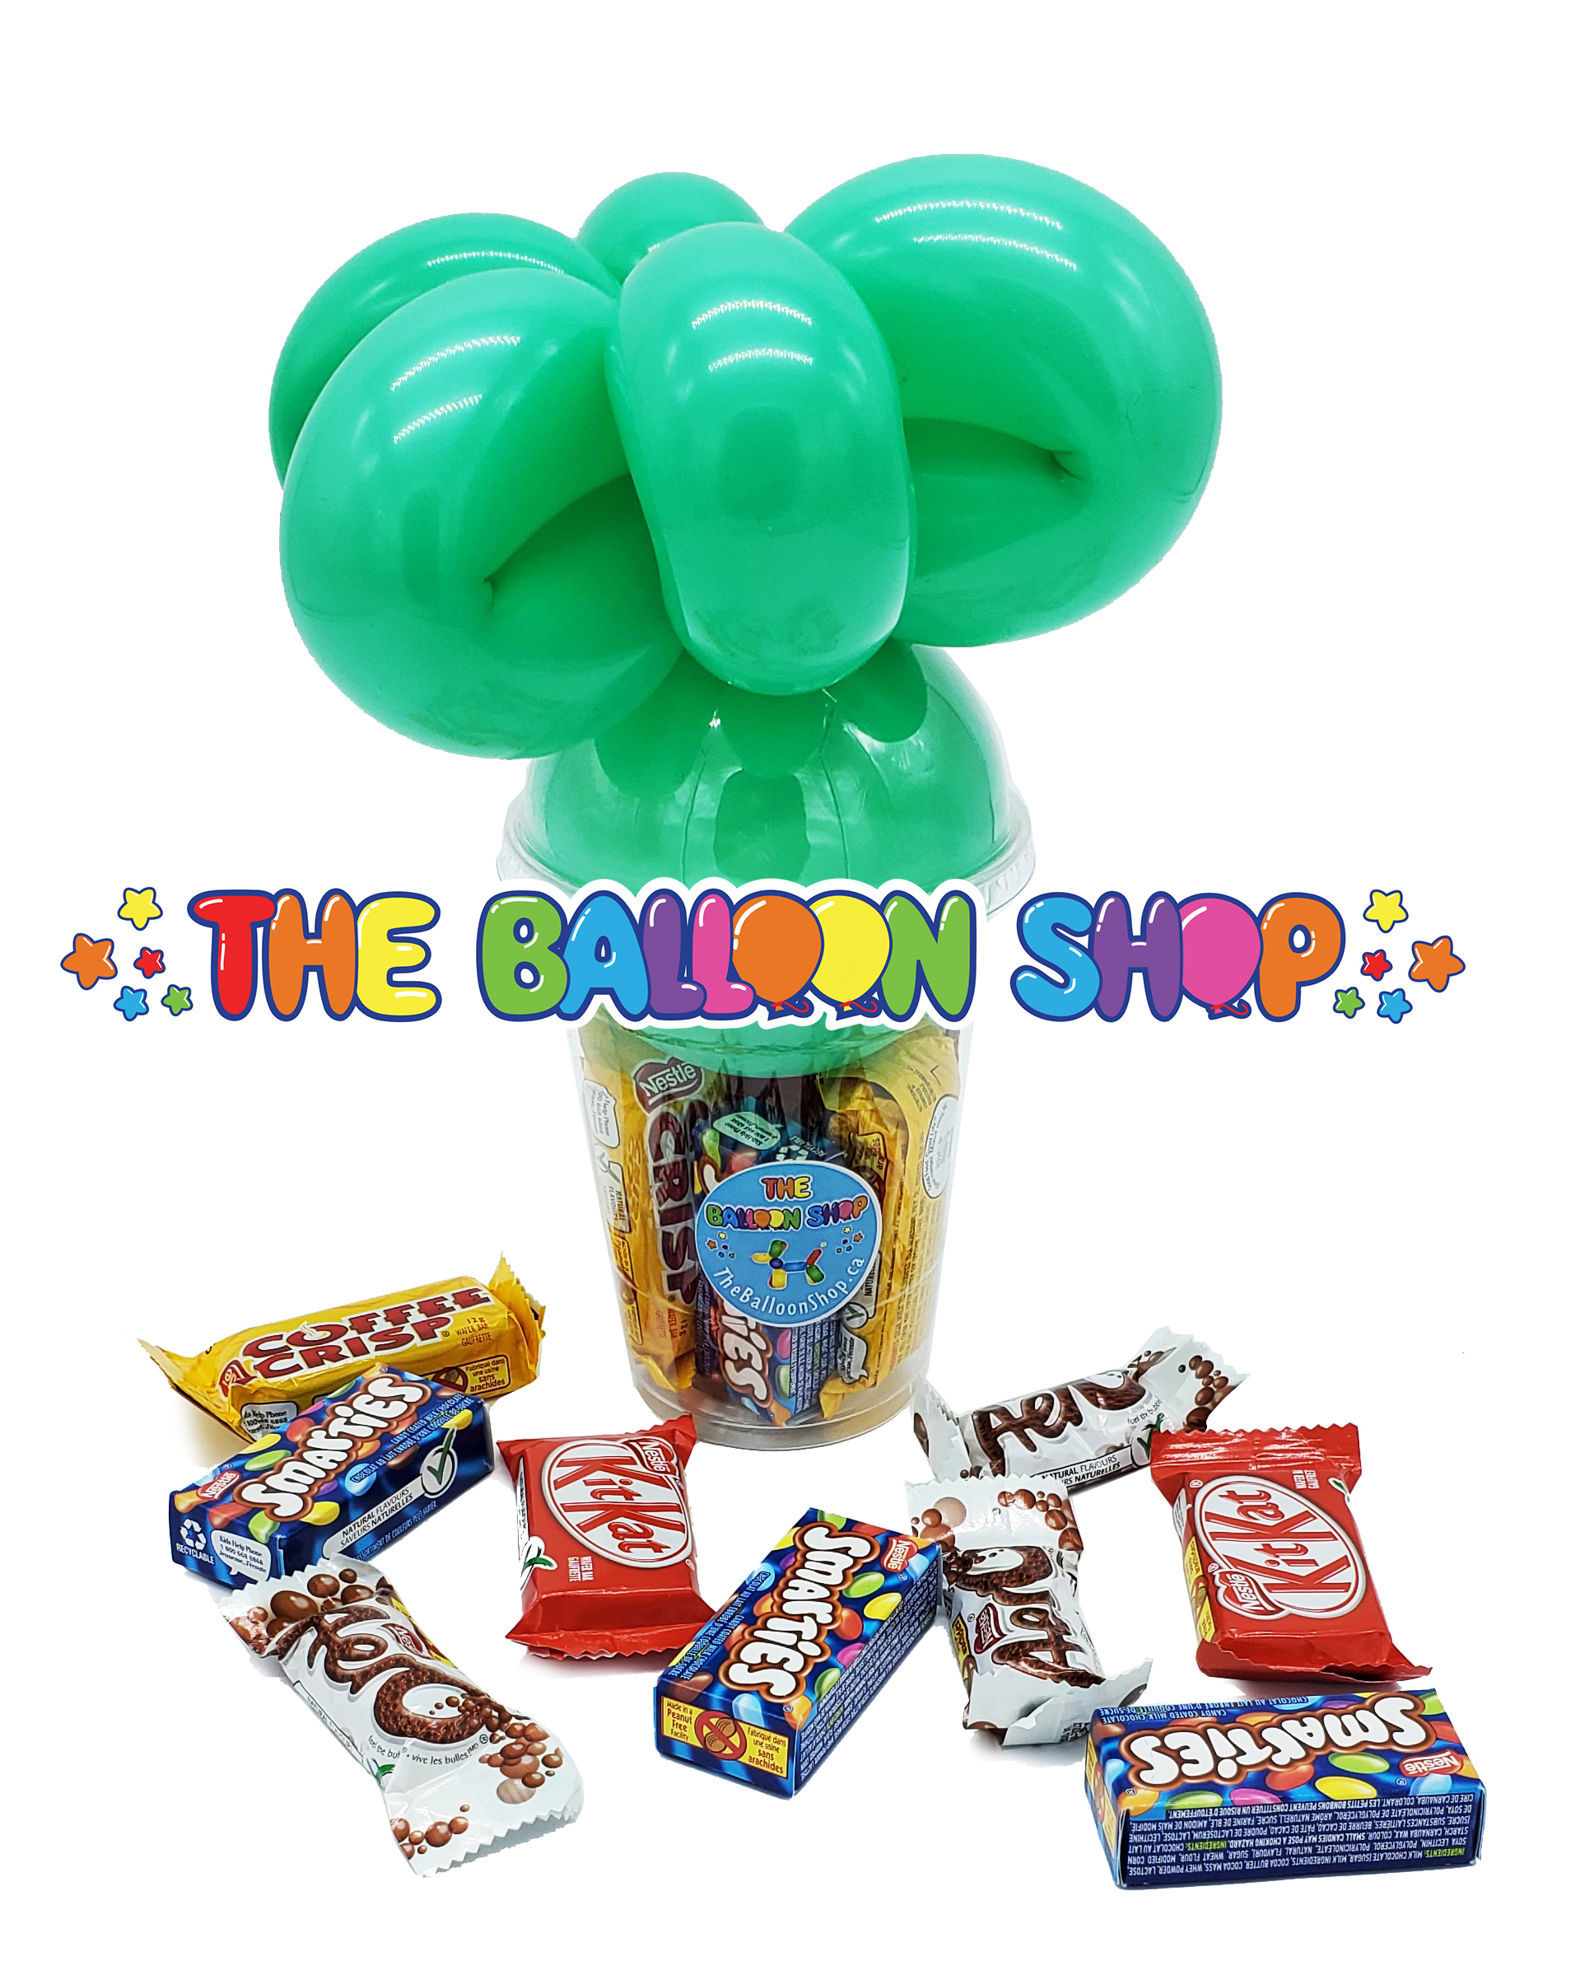 Picture of Spring Flower - Balloon Candy Cup